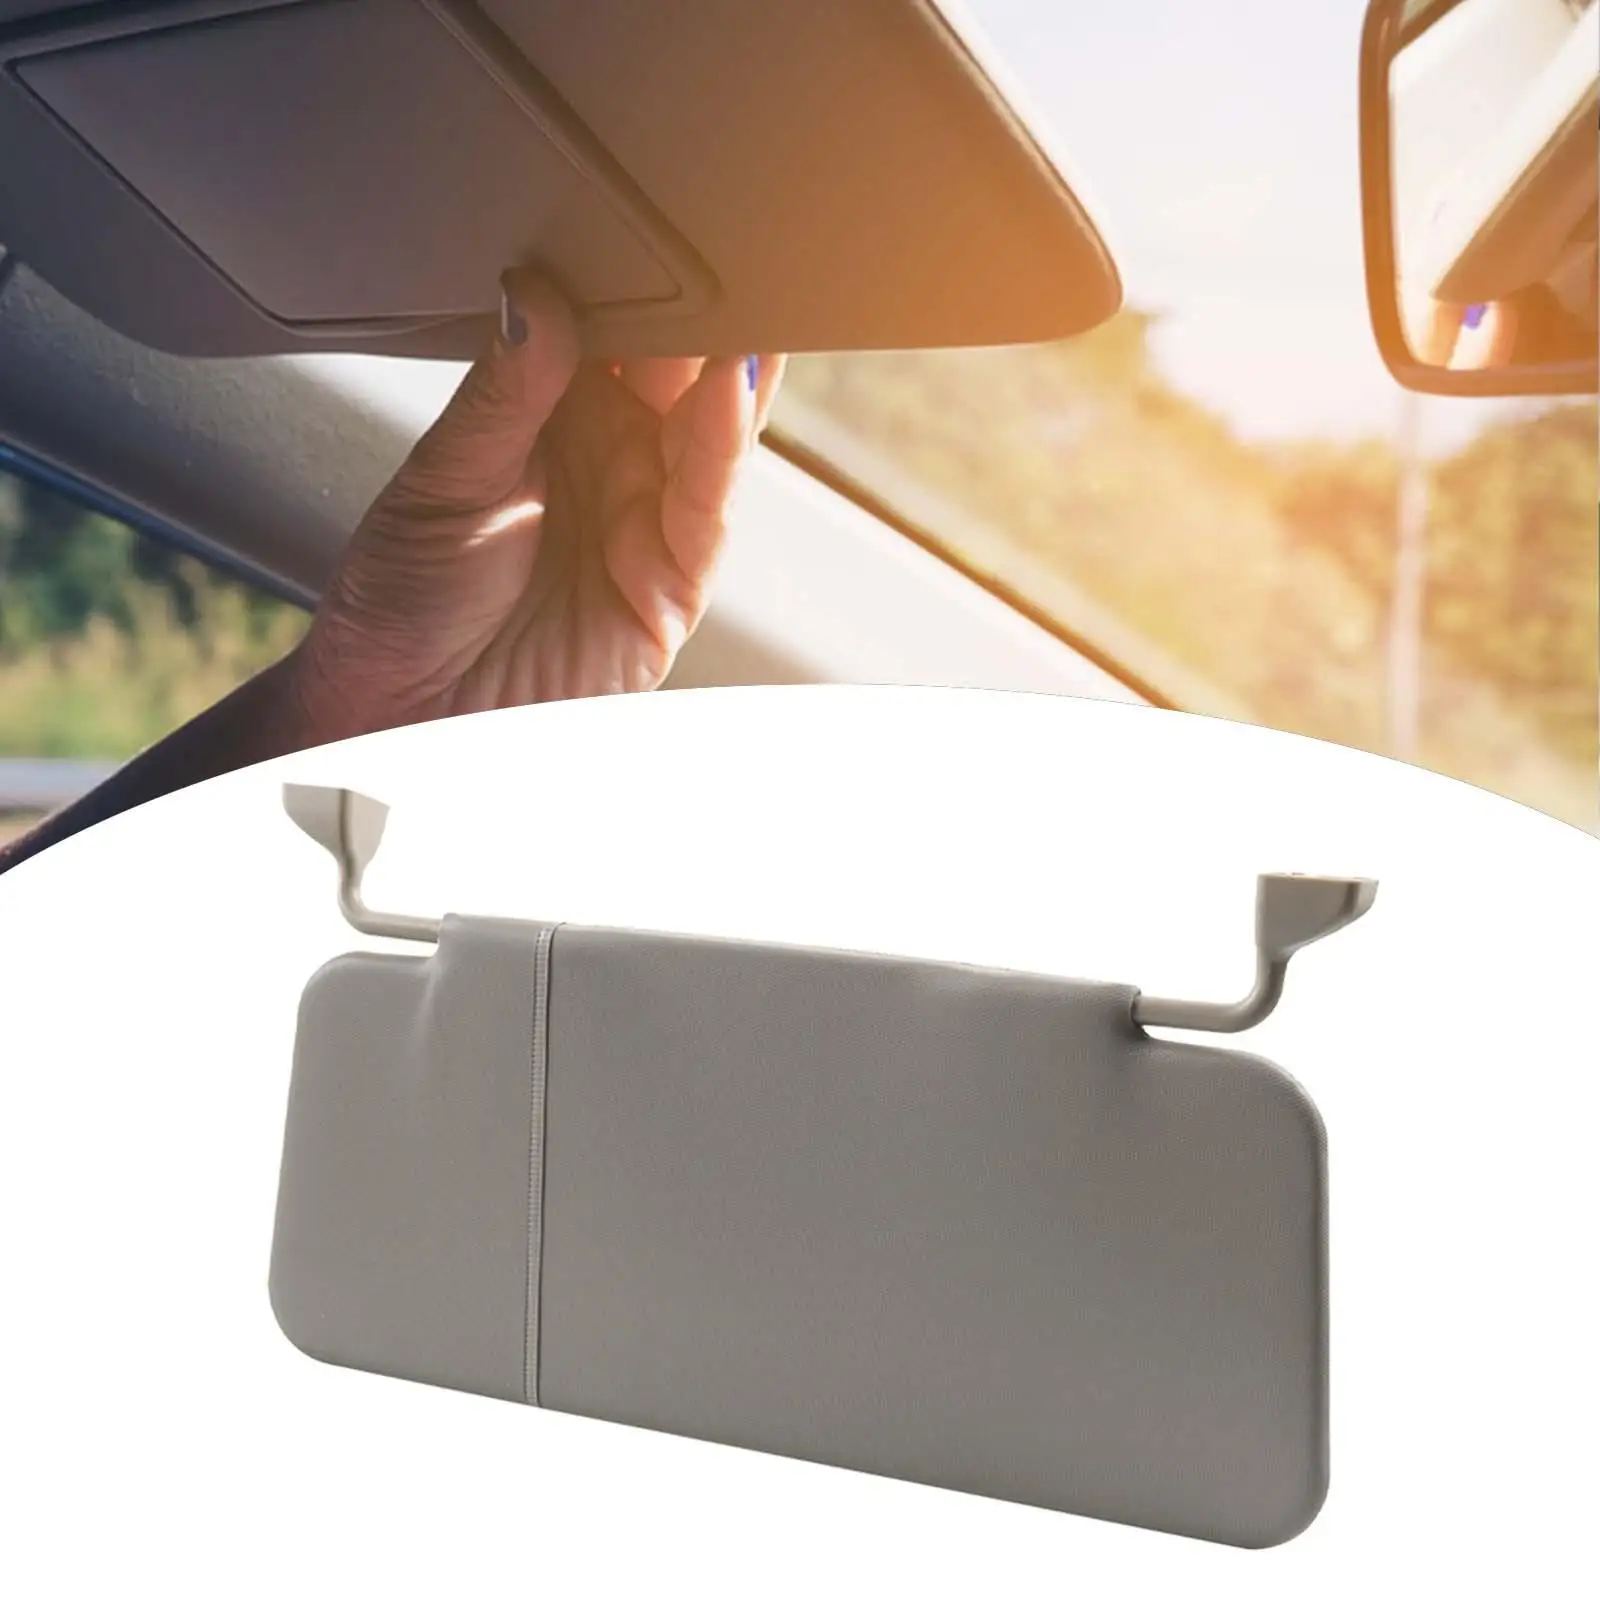 Replacement Sun Visor Shield Replaces Gray for Engineering Vehicle Vehicle Spare Parts Good Performance Easily Install